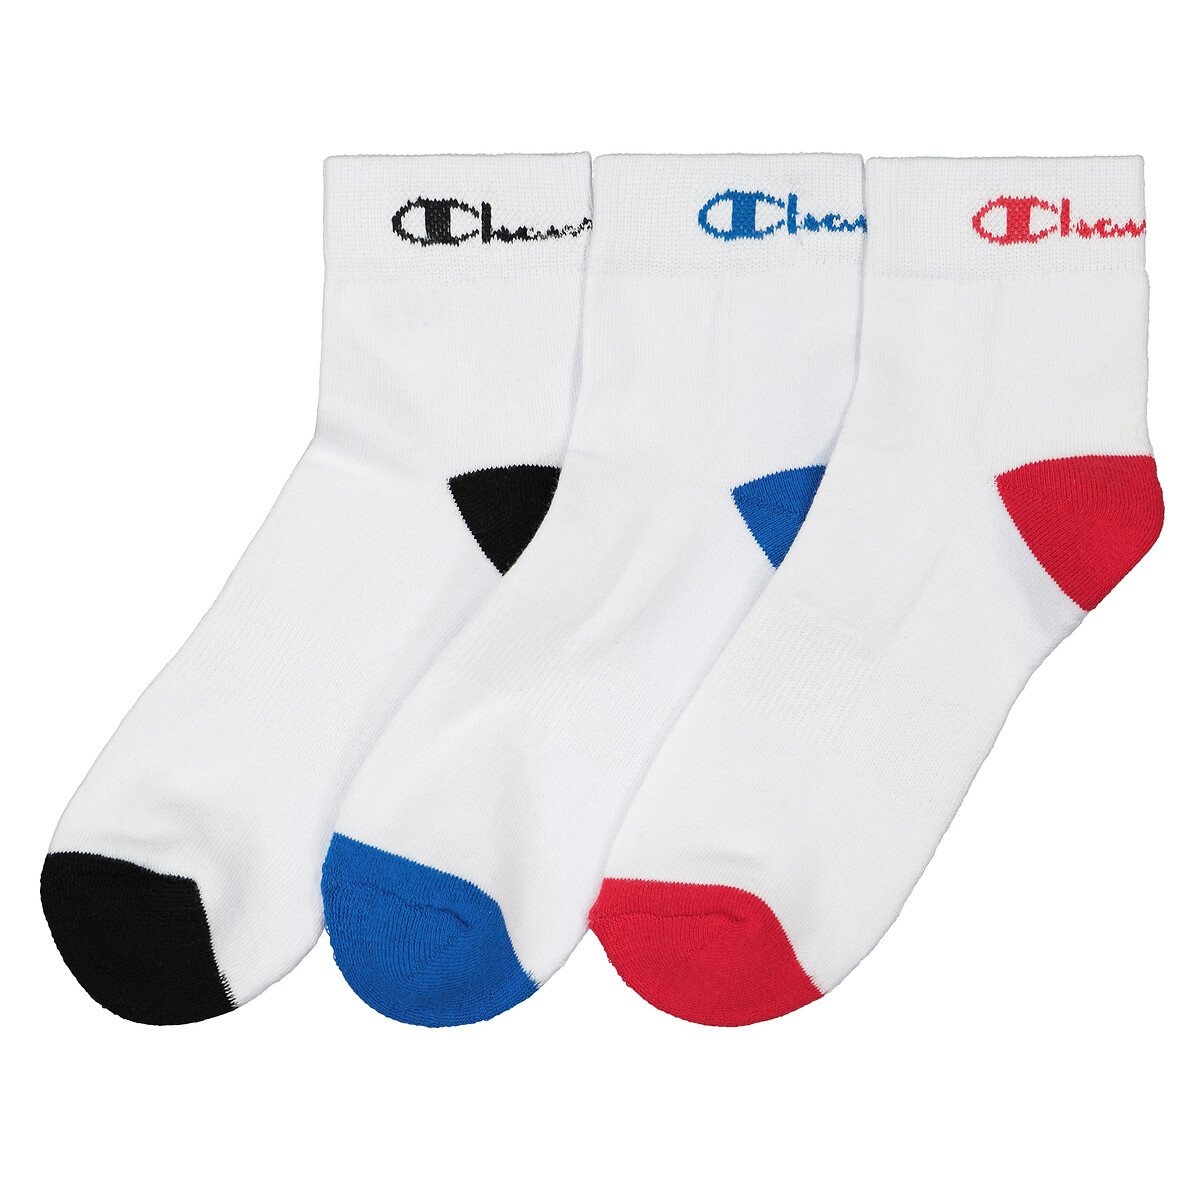 Pack of 3 Pairs of Reinforced Trainer Socks in Cotton Mix